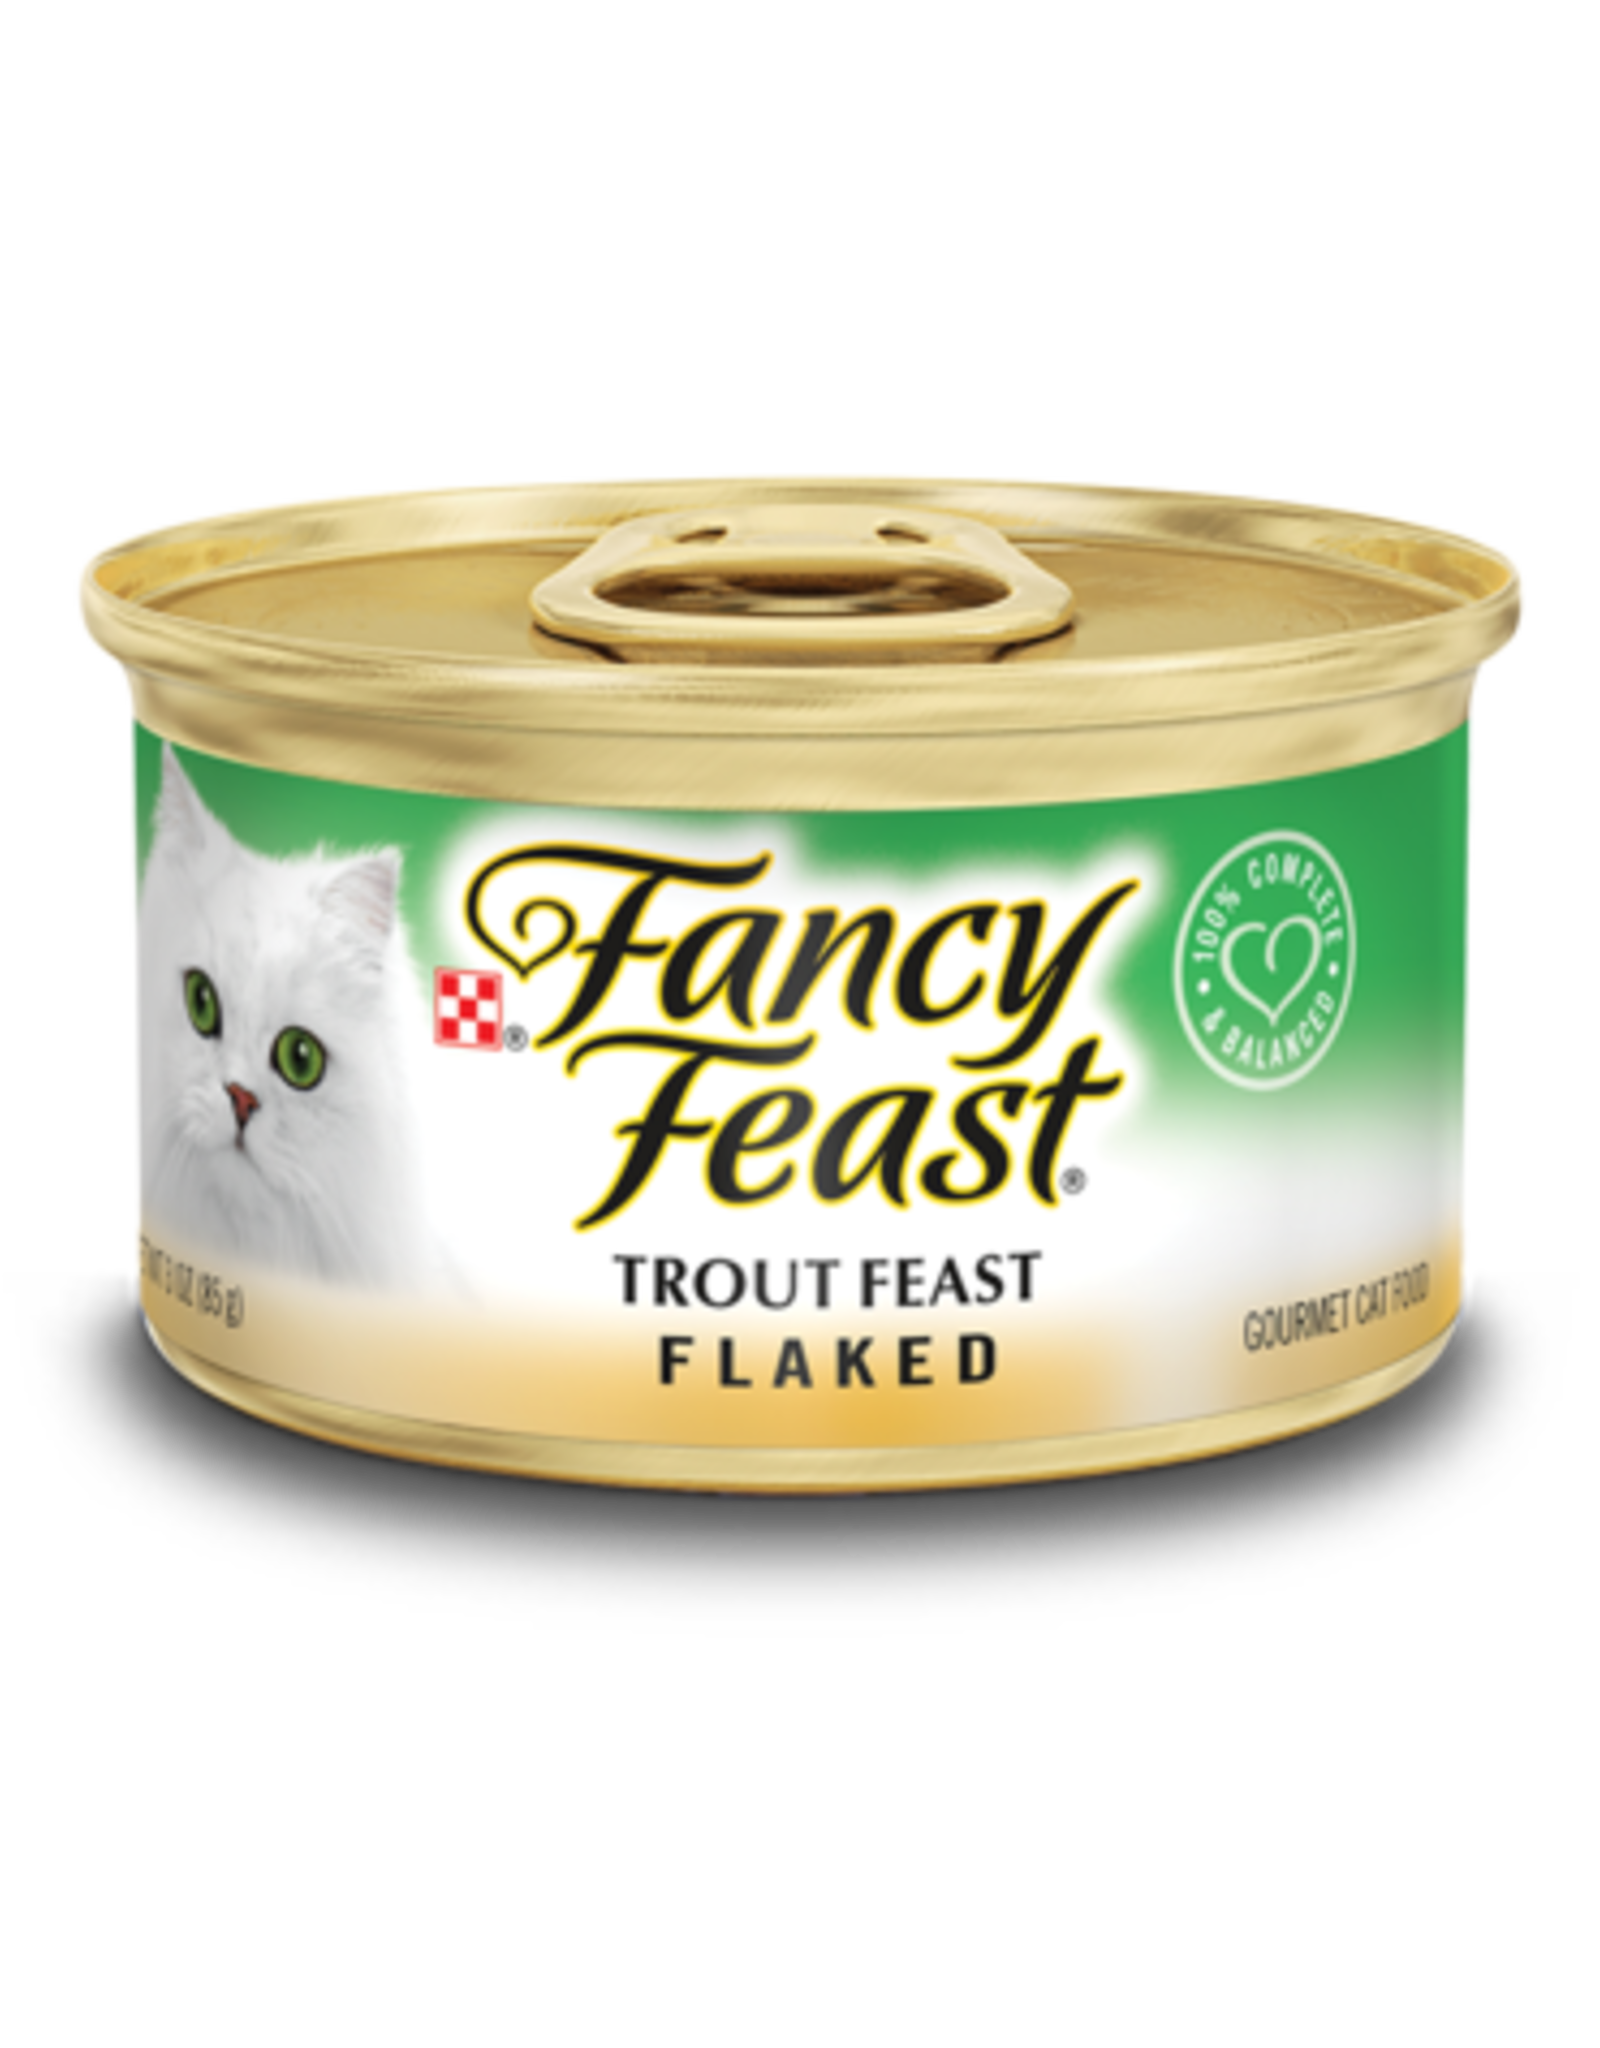 NESTLE PURINA PETCARE FANCY FEAST FLAKED TROUT 3OZ CASE OF 24